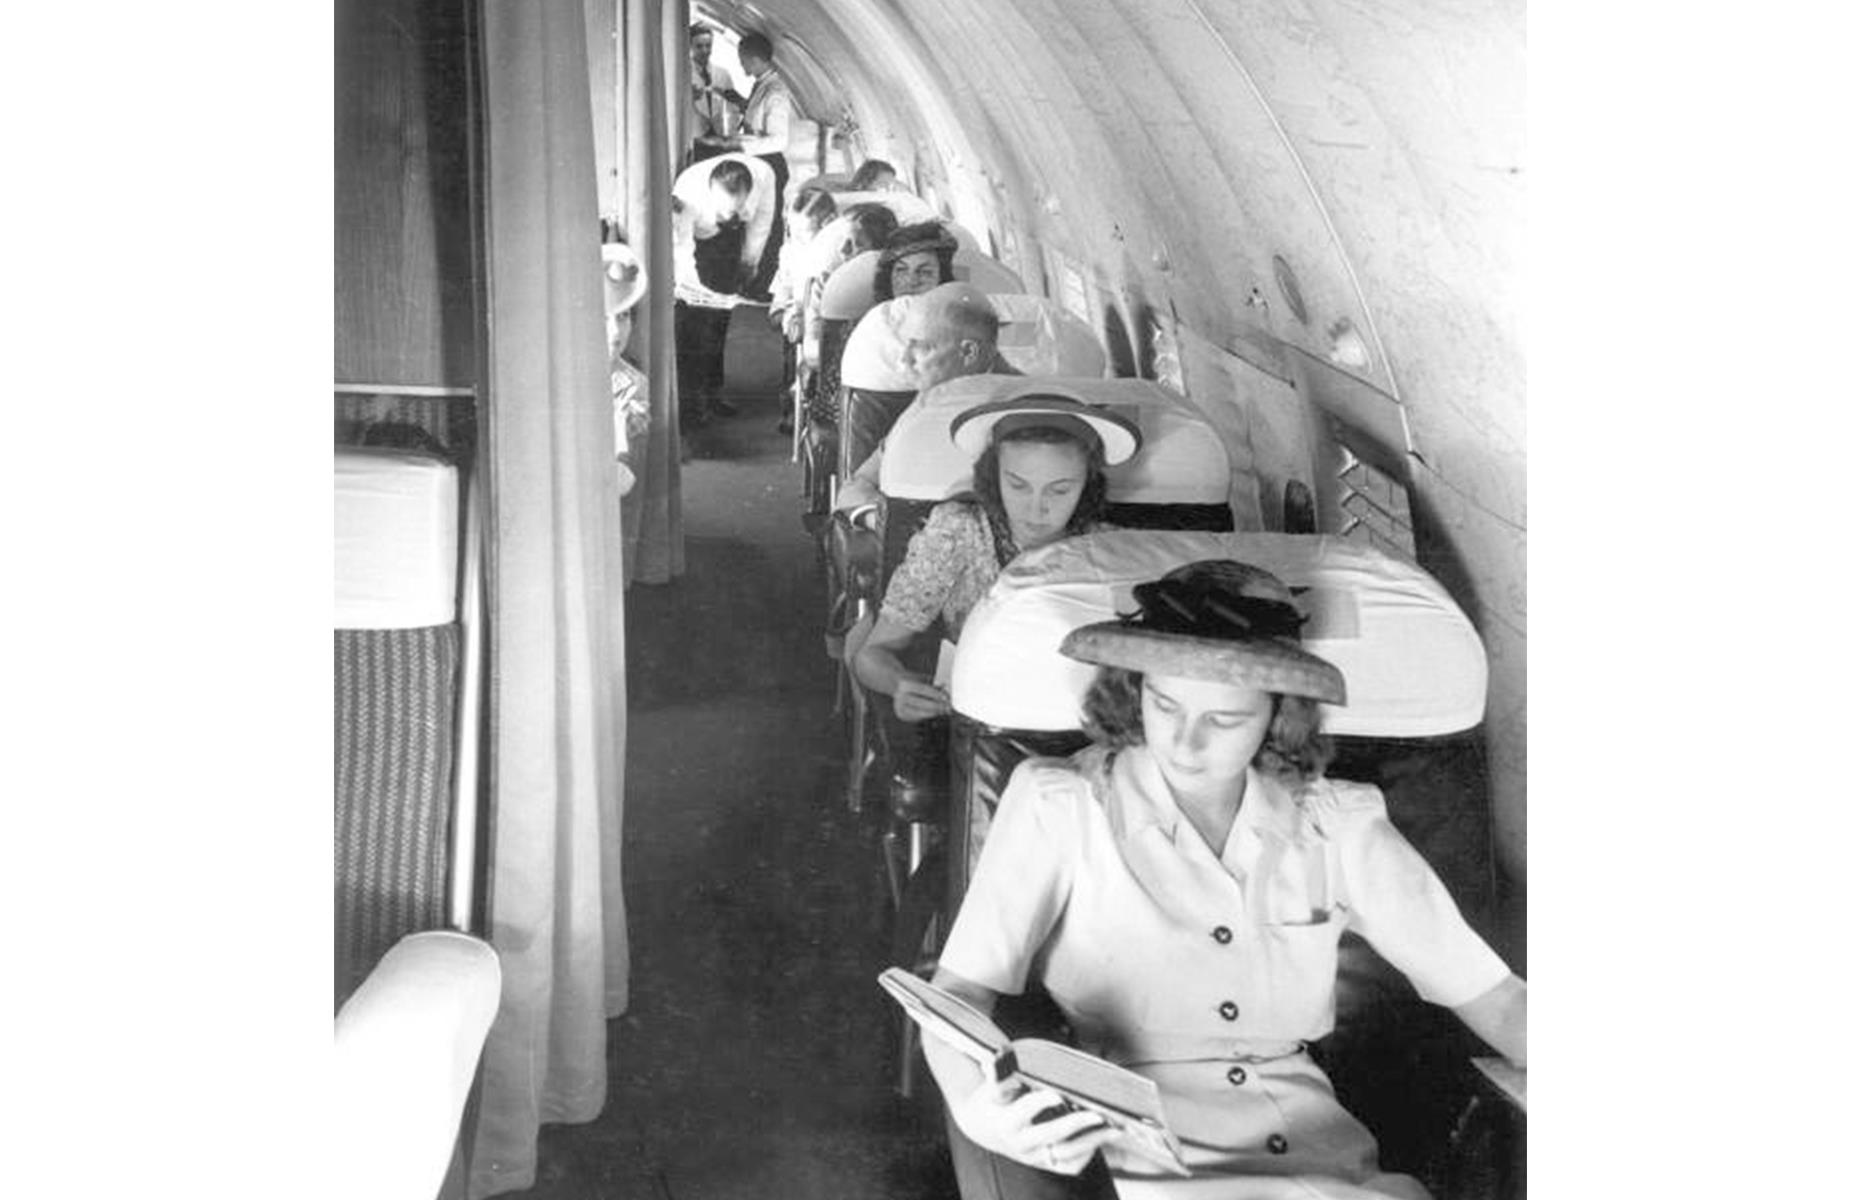 Pan Am began operating its fleet of Boeing 307 aircraft in the 1940s. The Boeing 307 was another model that propelled commercial aviation forwards, since it was the first to boast a pressurized cabin. This meant passengers (as pictured onboard here c.1945) could enjoy a comfortable ride at around 20,000 feet (6,000m). The model was also flown by TWA.